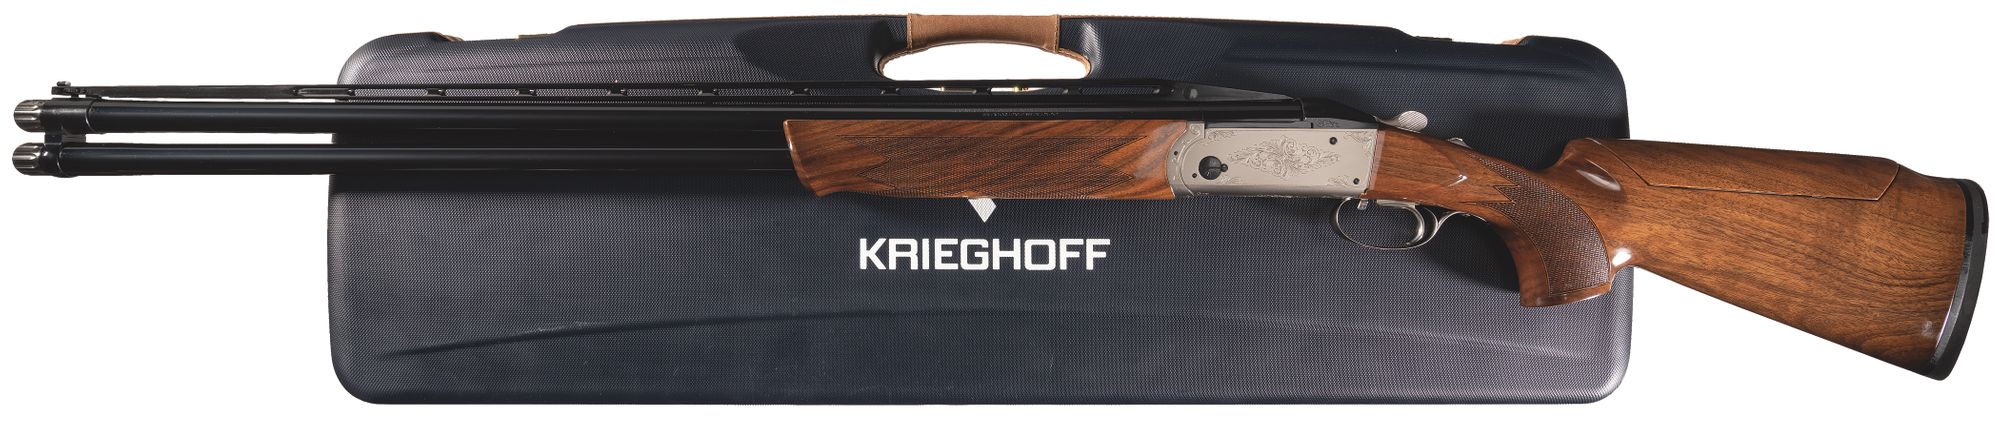 Lot-1000-Factory-Engraved-Krieghoff-K-80-Over-Under-Shotgun-with-Cases